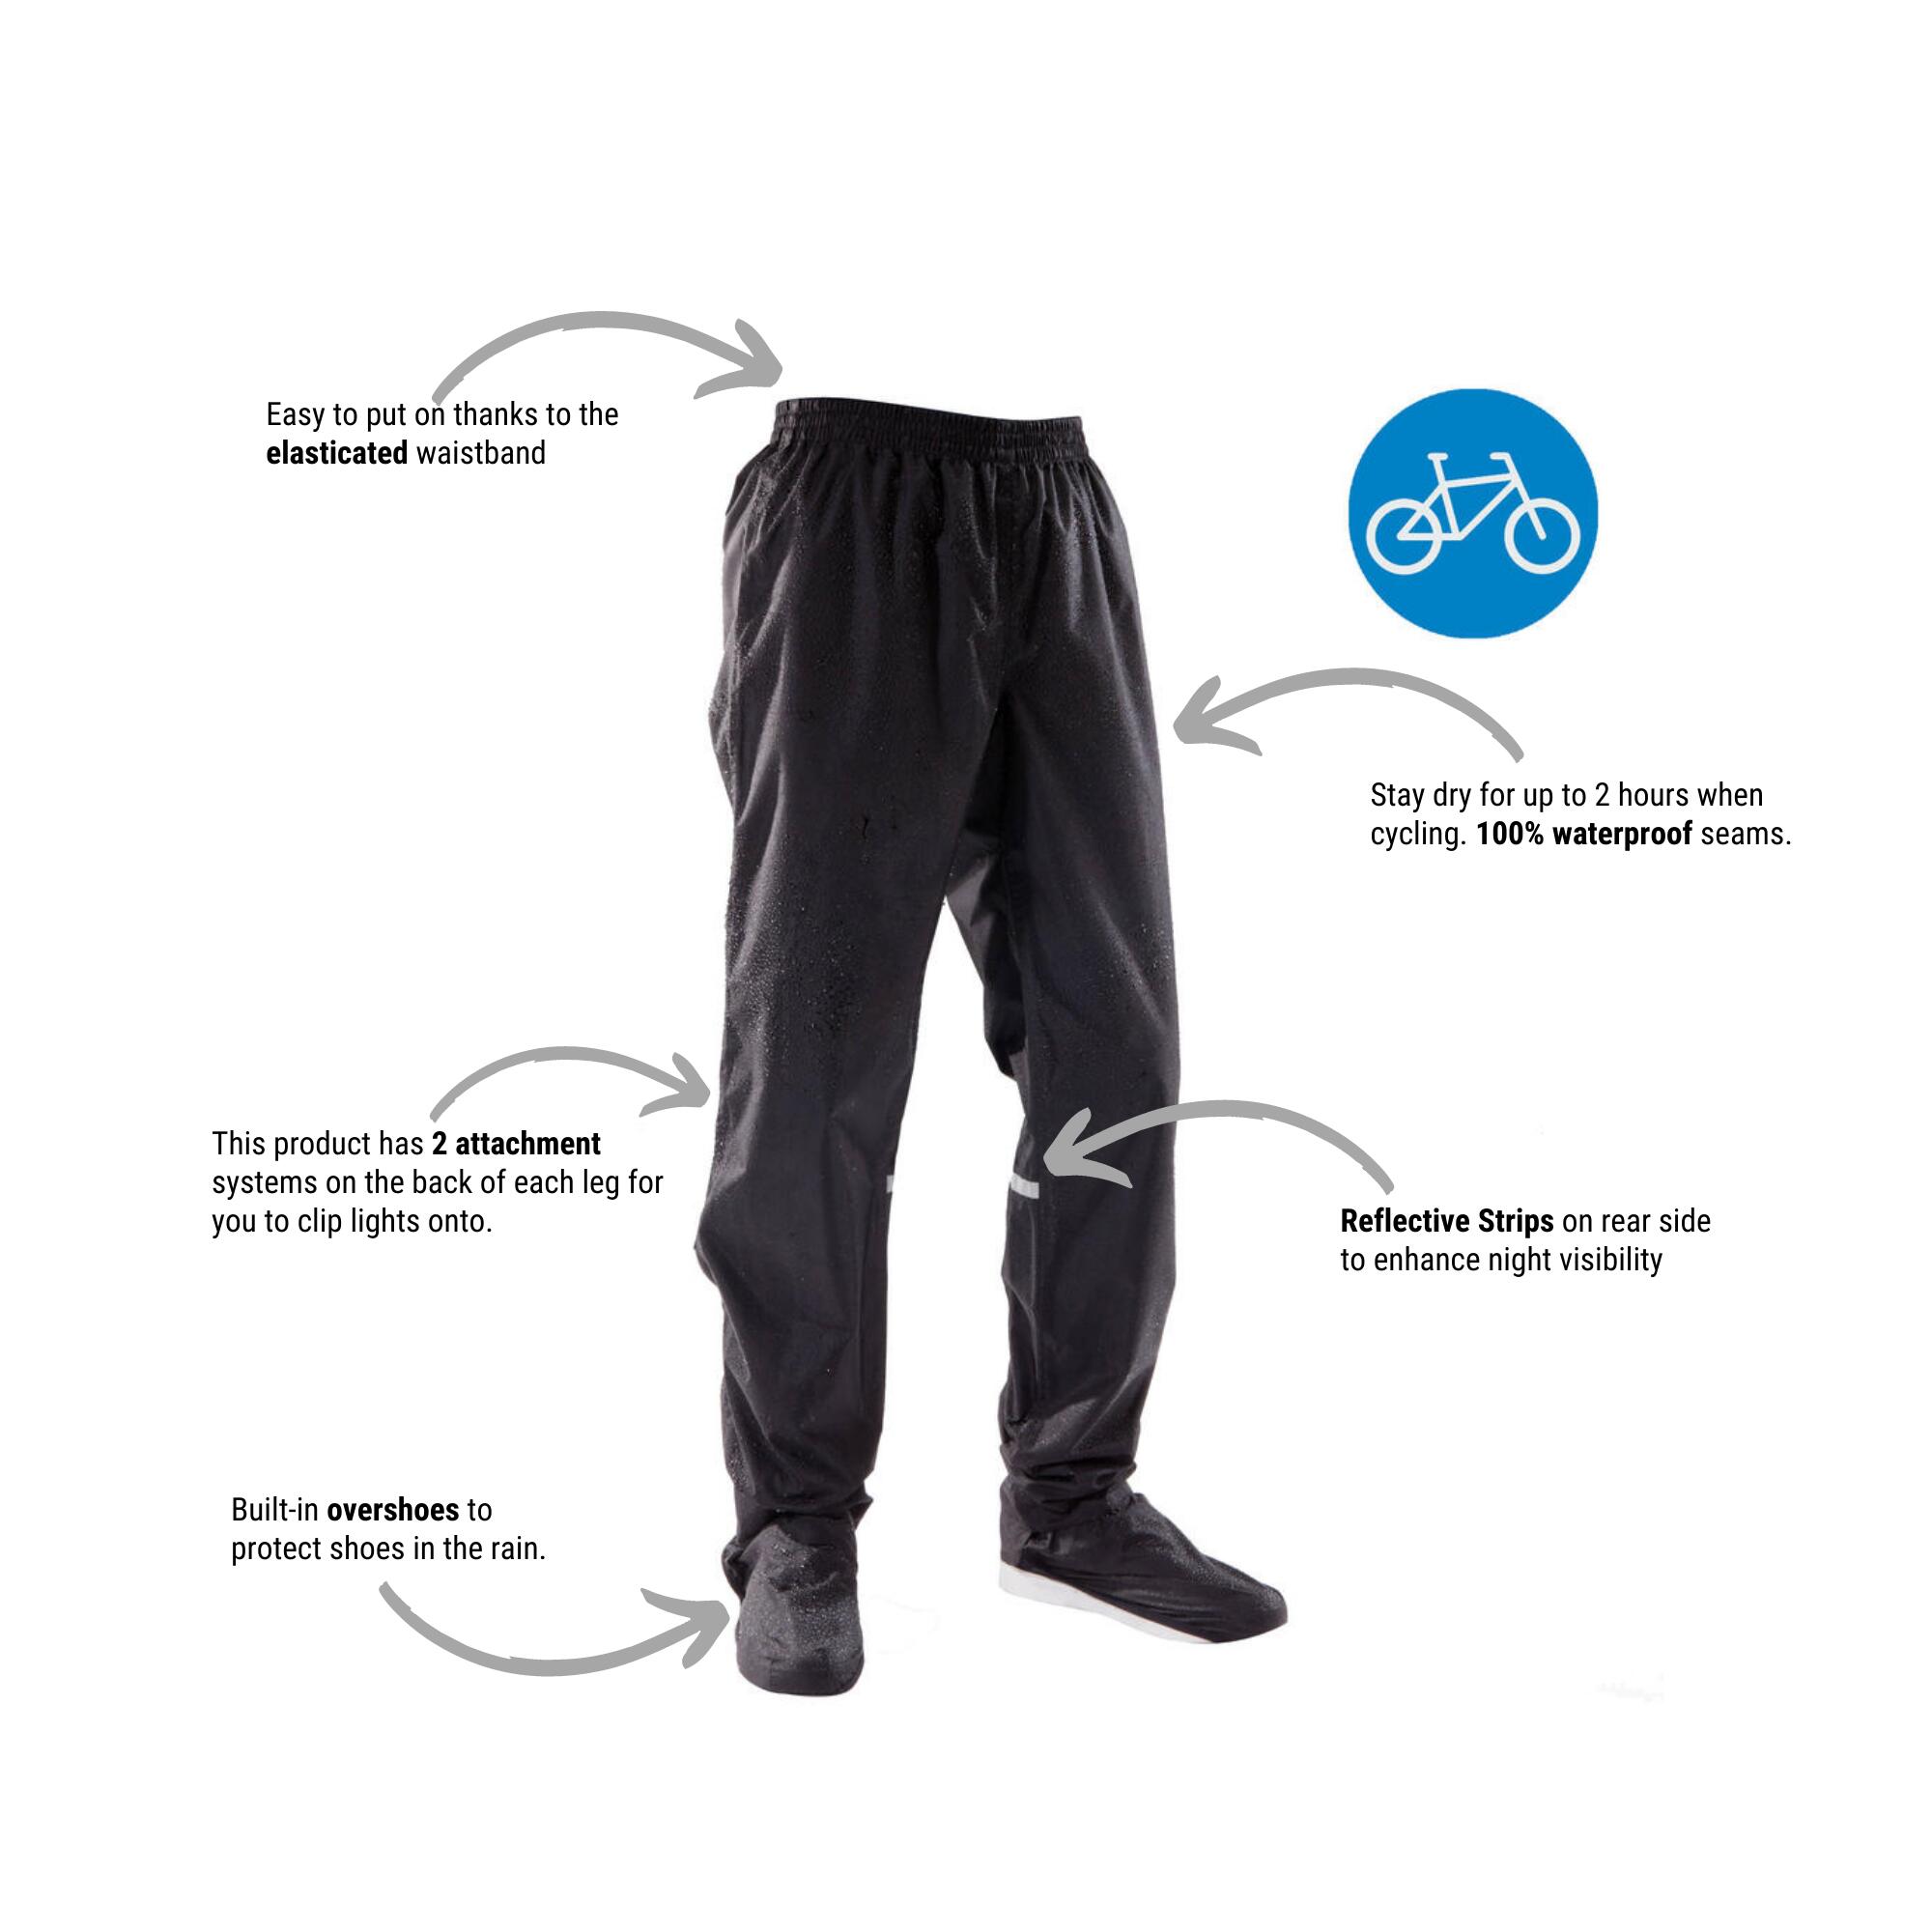 Decathlon Women's Mountain Hiking trousers review - MBR